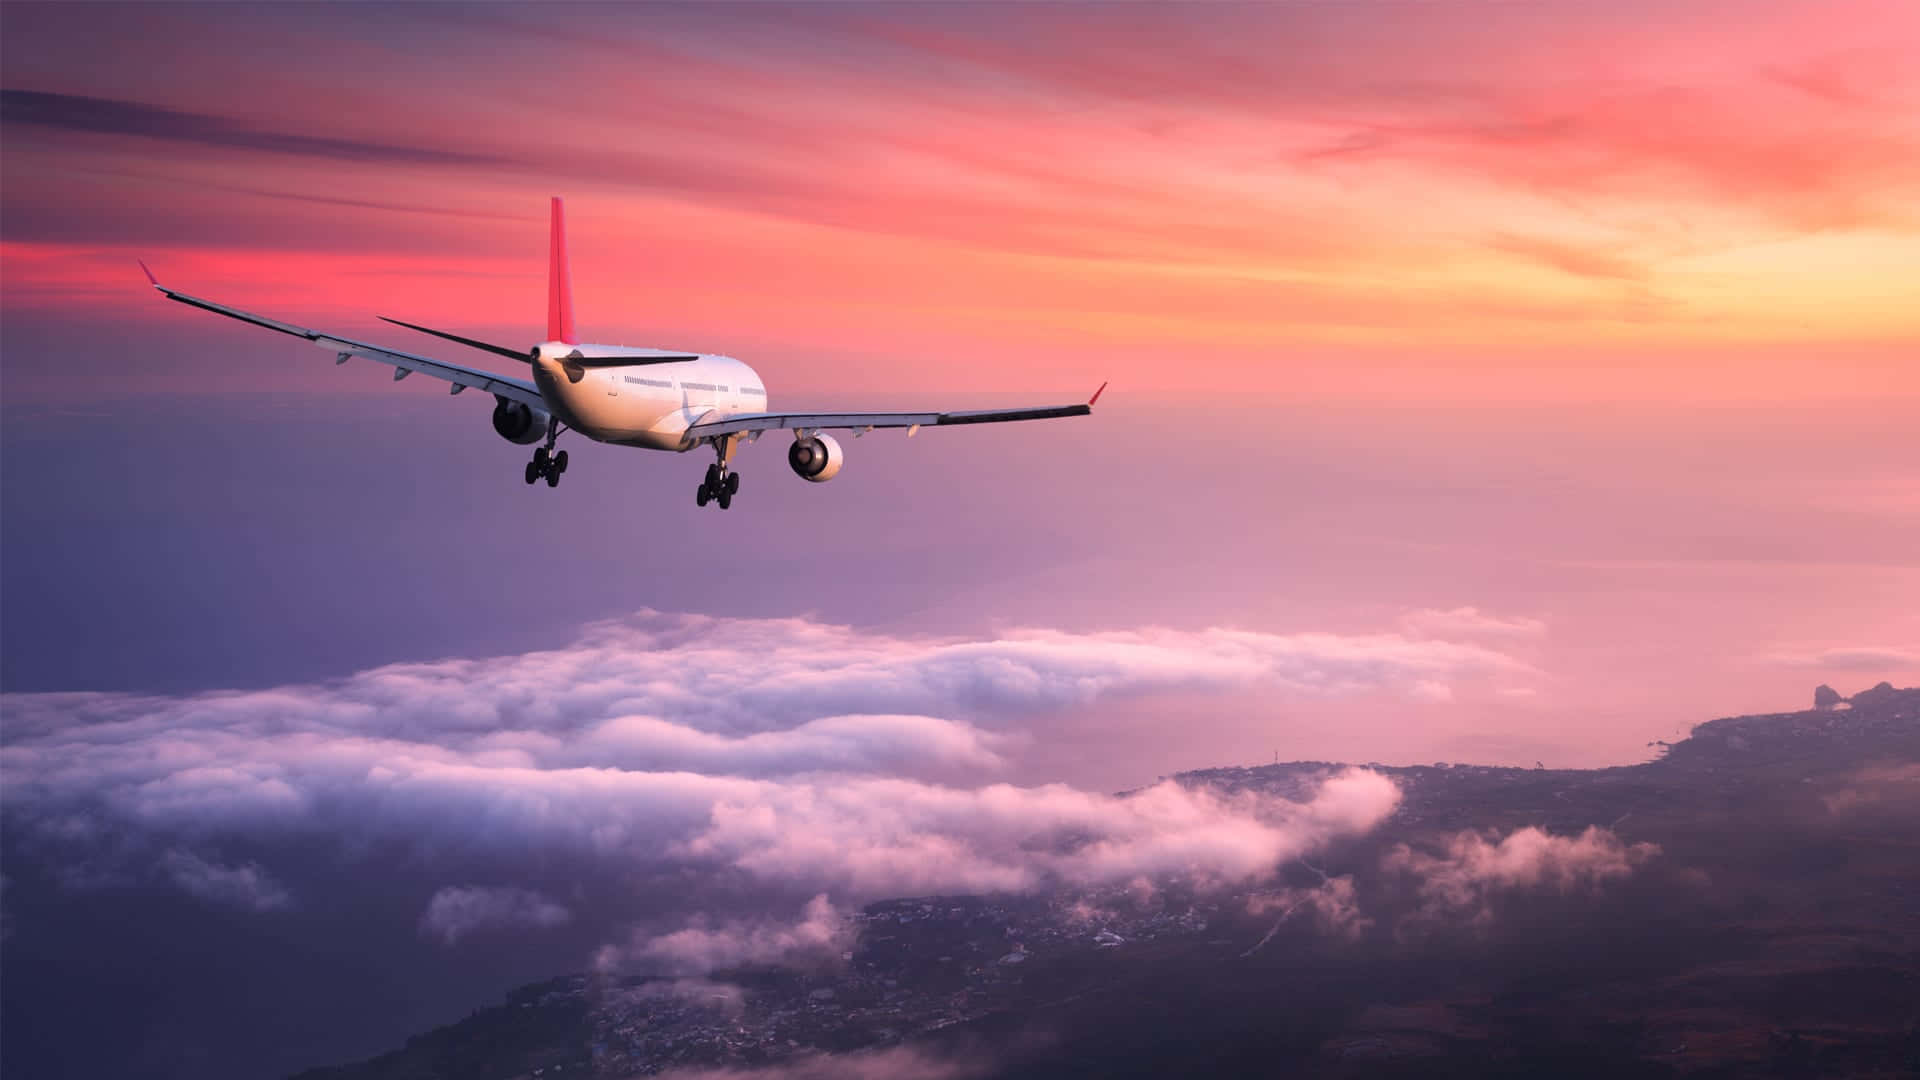 A pink passenger plane flying in the sky against a backdrop of clouds Wallpaper